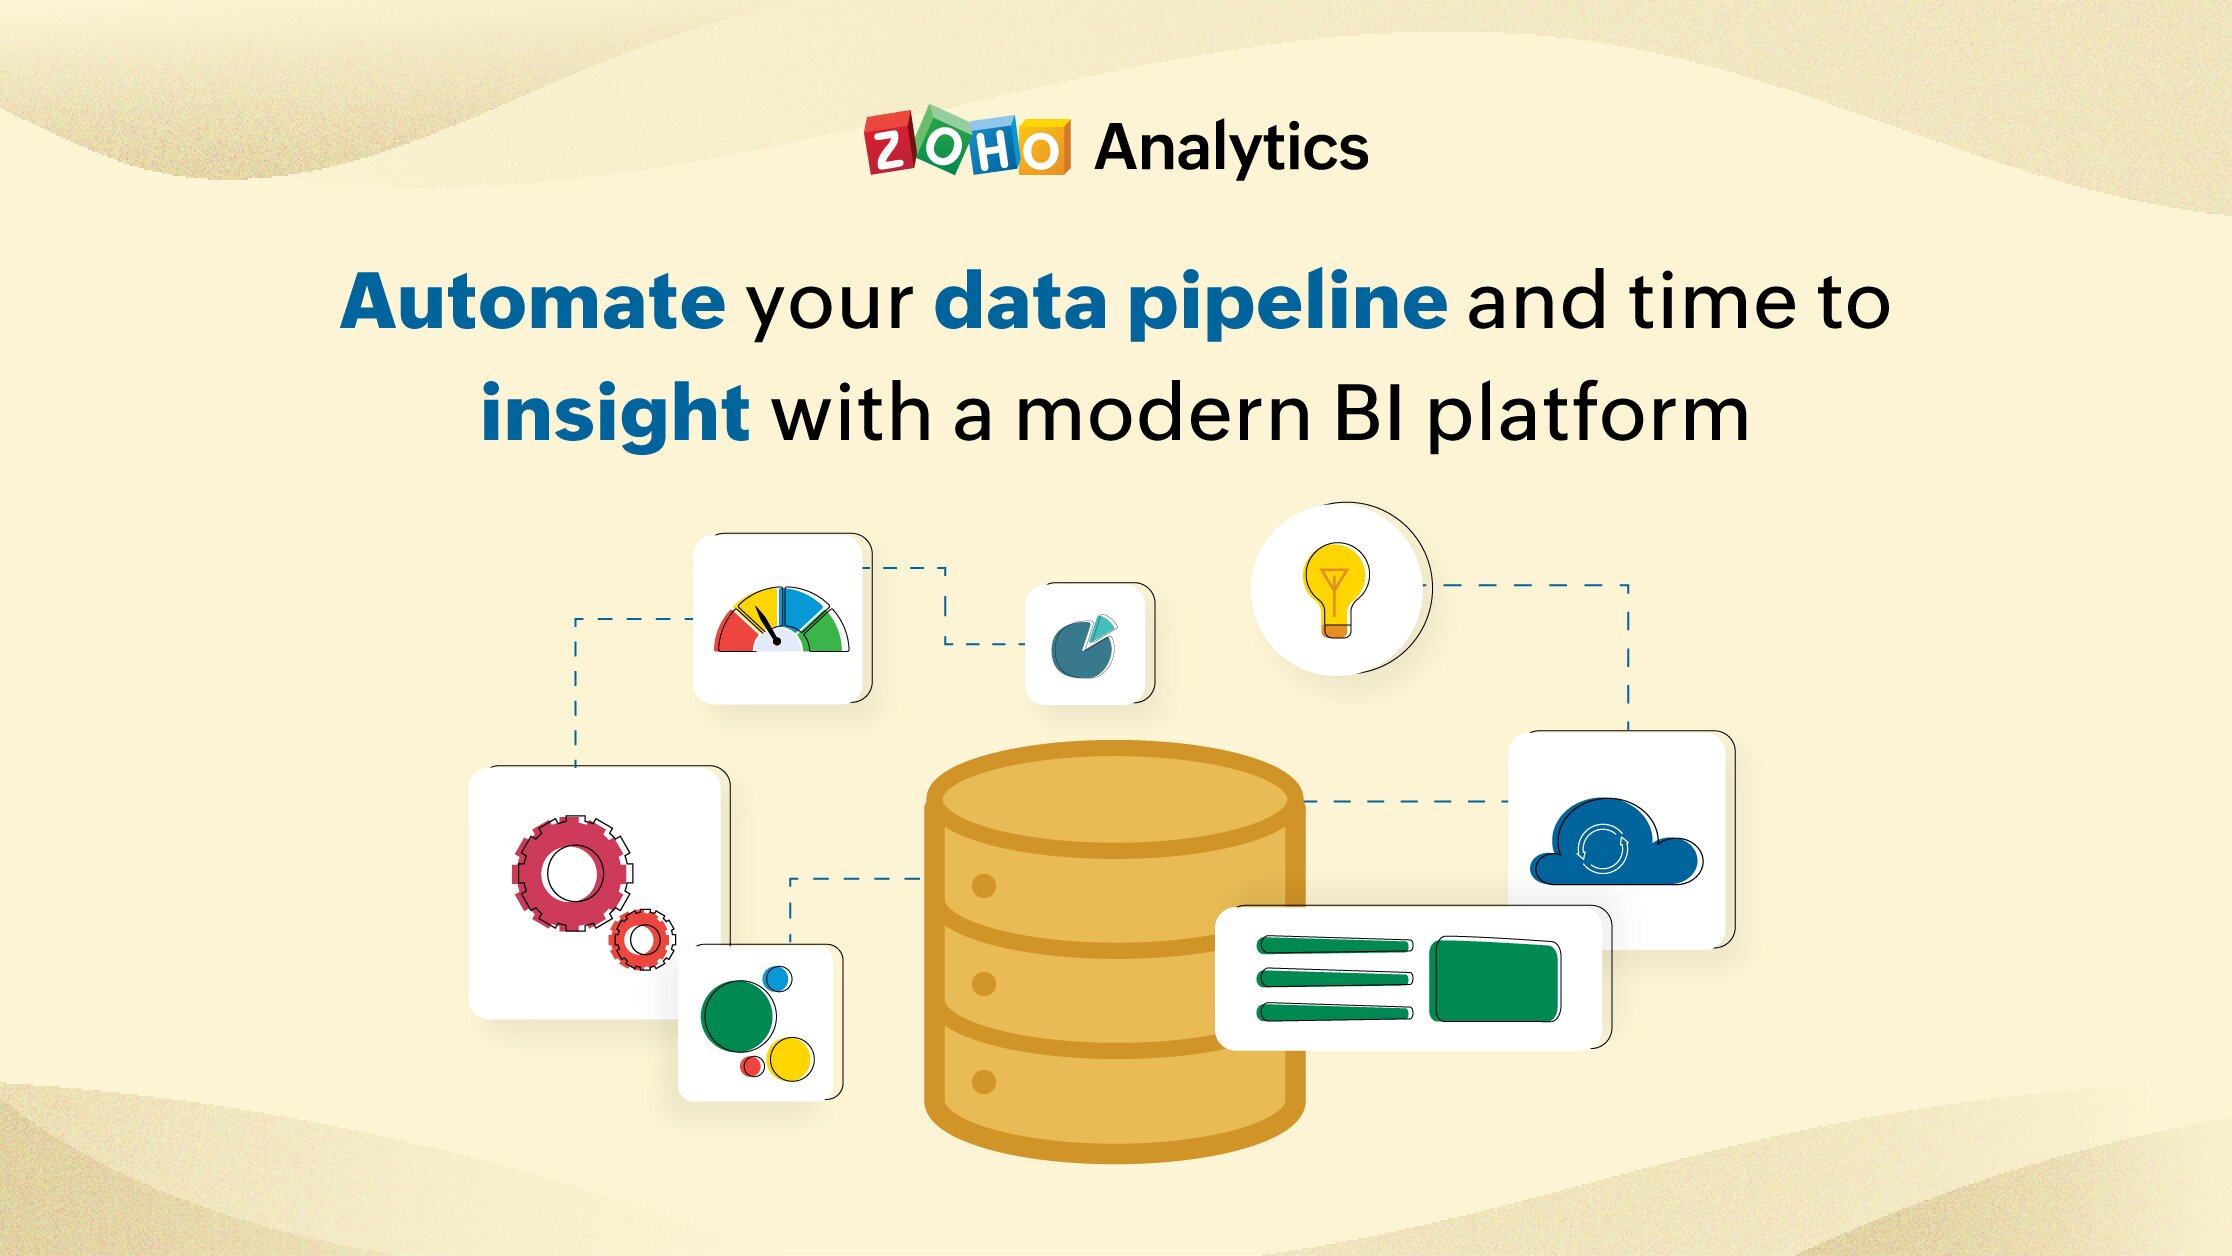 Automate your data pipeline and time to insight with a modern BI platform